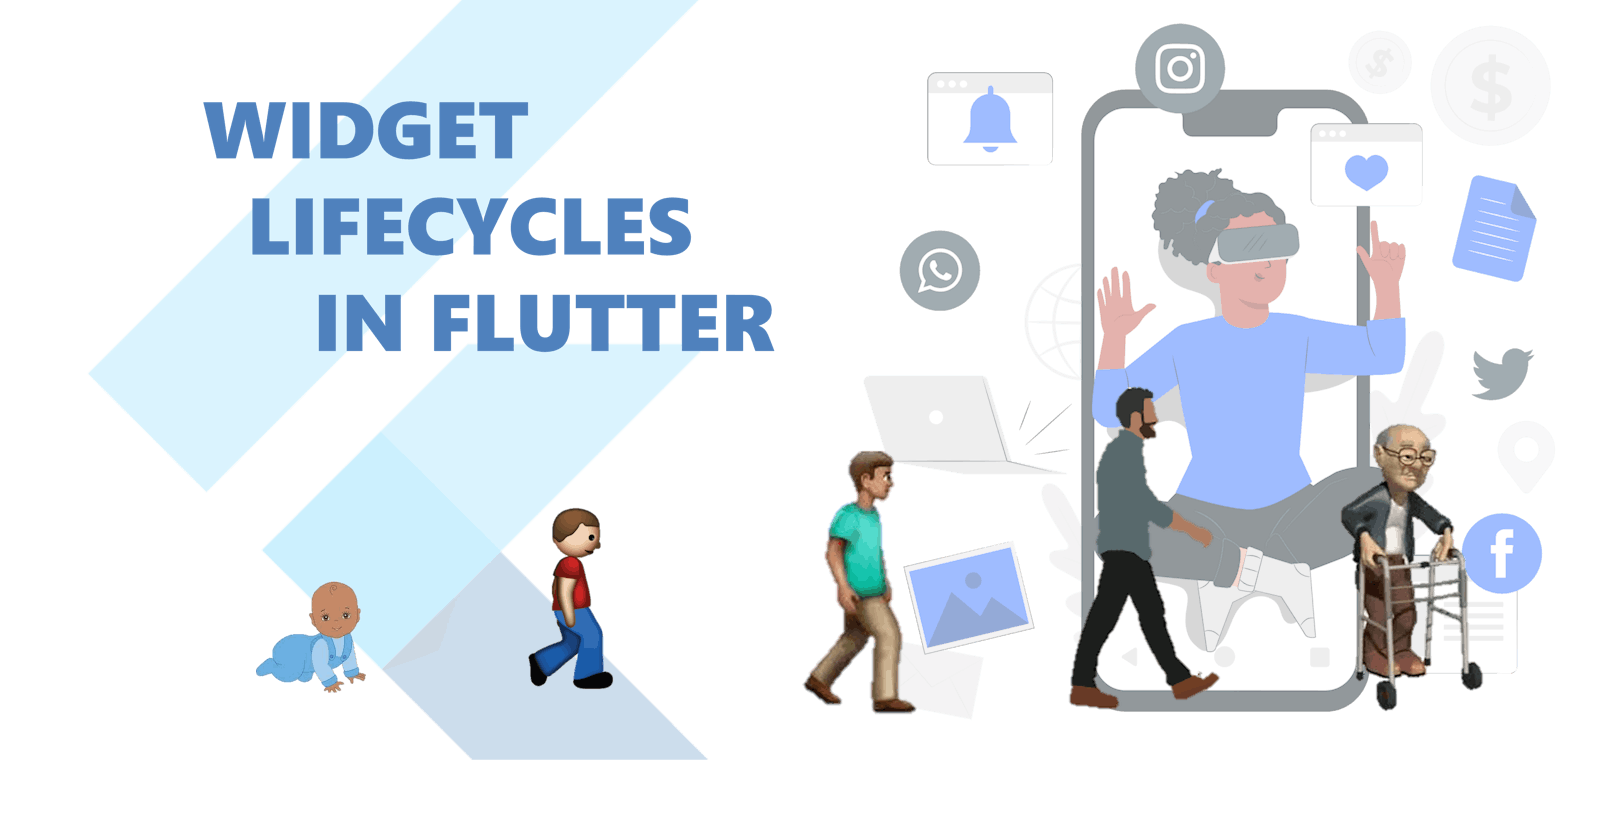 A Simplistic Review of the Lifecycle of Flutter Widgets